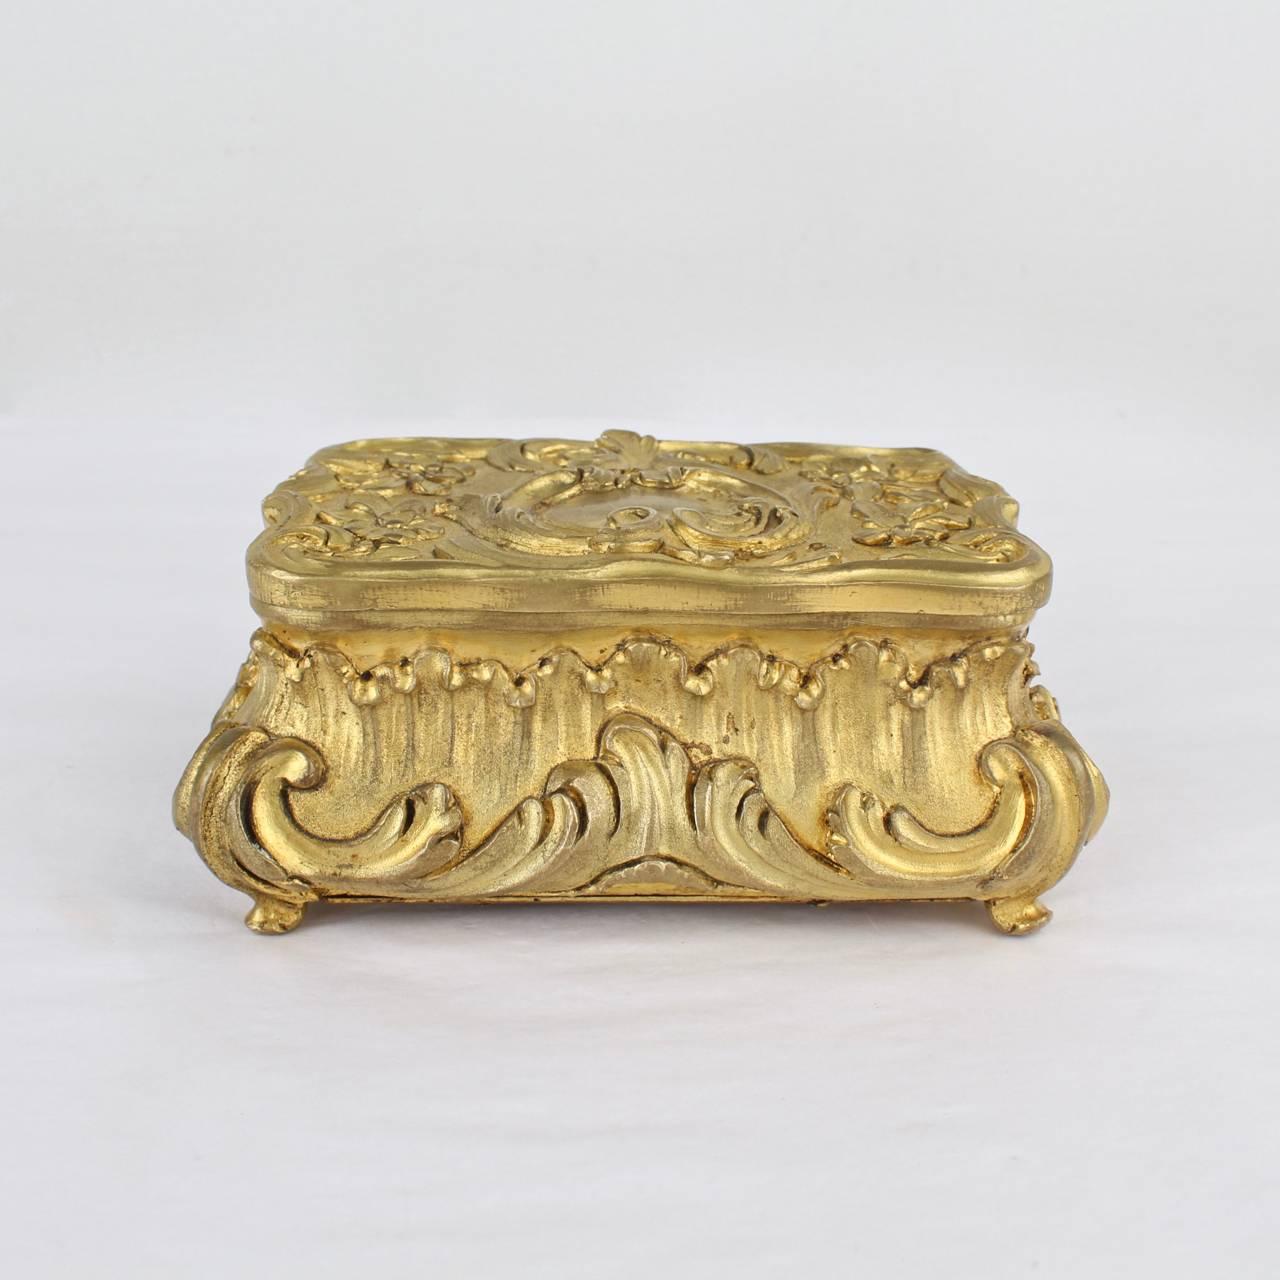 An small, heavy doré gilt bronze box or casket of very good quality.

With a divided interior and hinged lid.

Possibly French and likely 19th century.

With fine casting, surprising weight, and superb design.

Measures: Length ca. 4 1/4